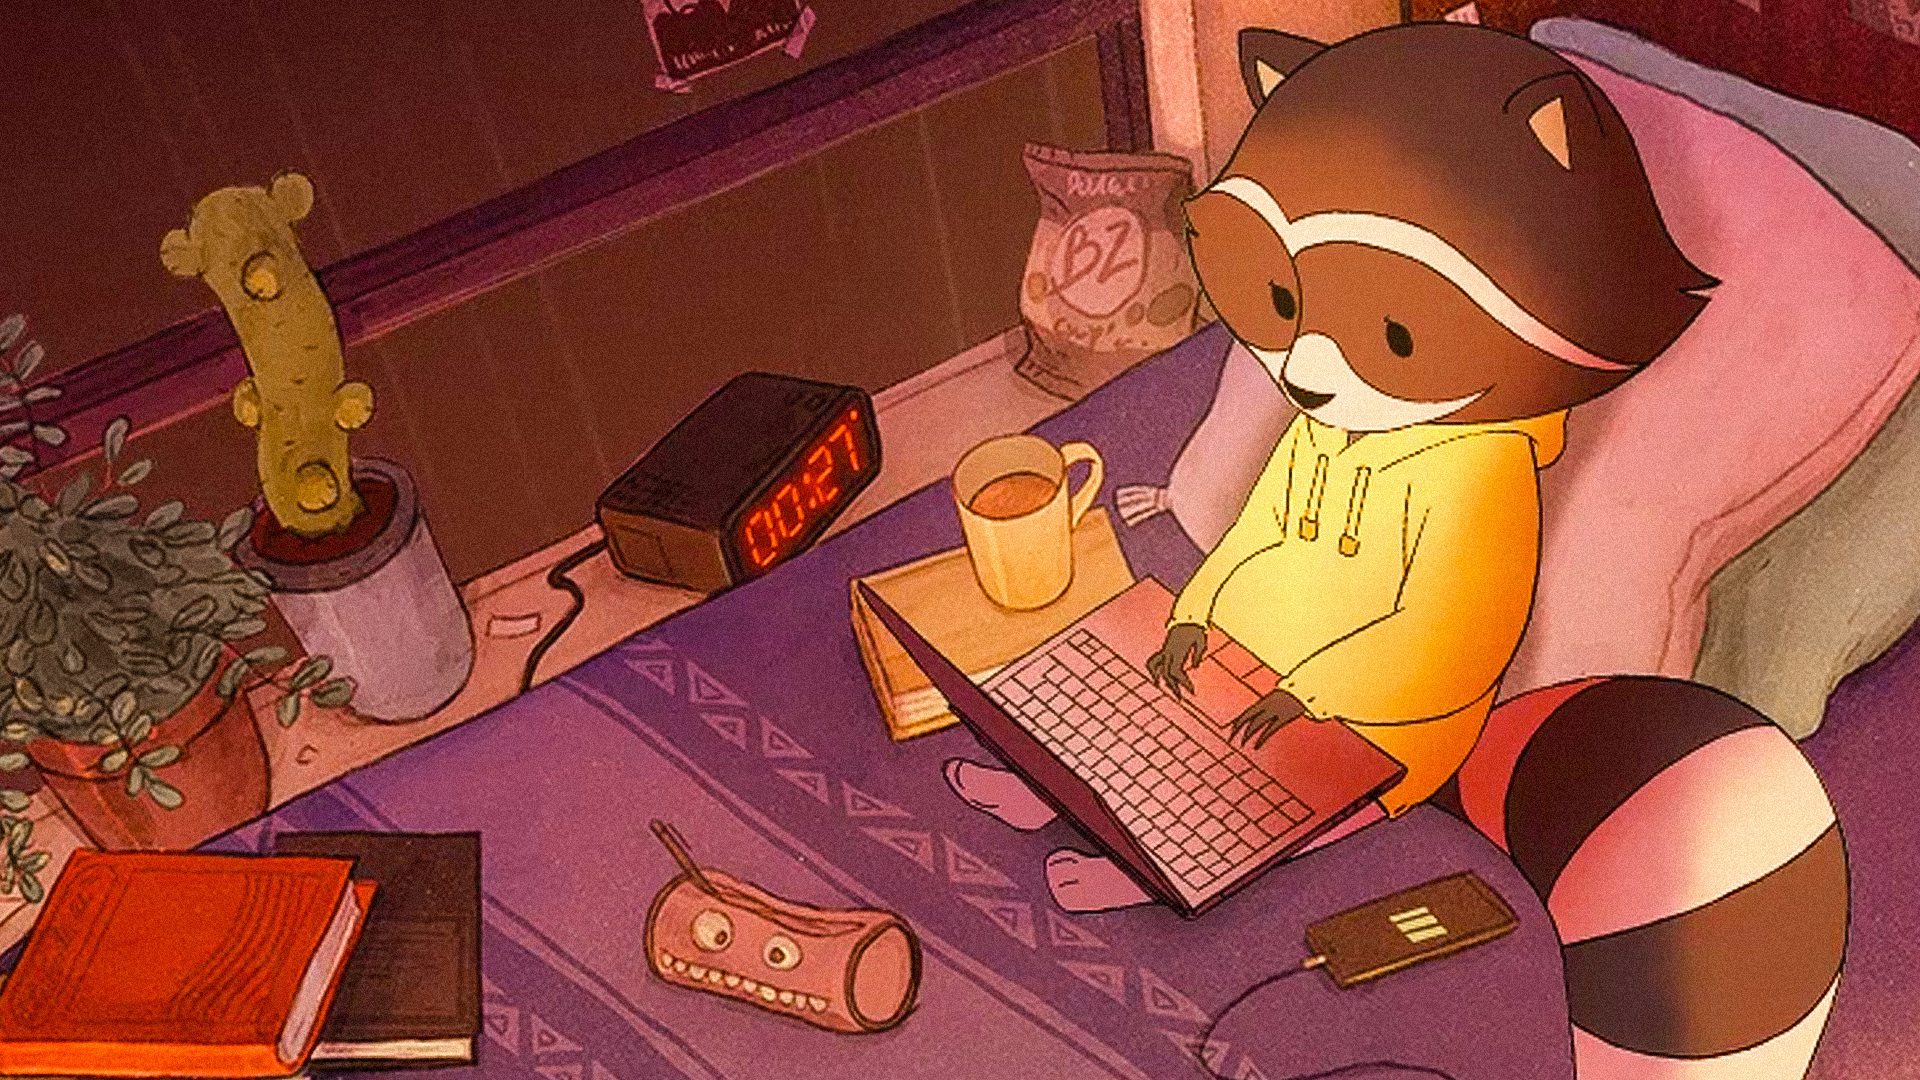 Best Live Streaming for Background Lofi Beats for Relaxing, Studying or Working